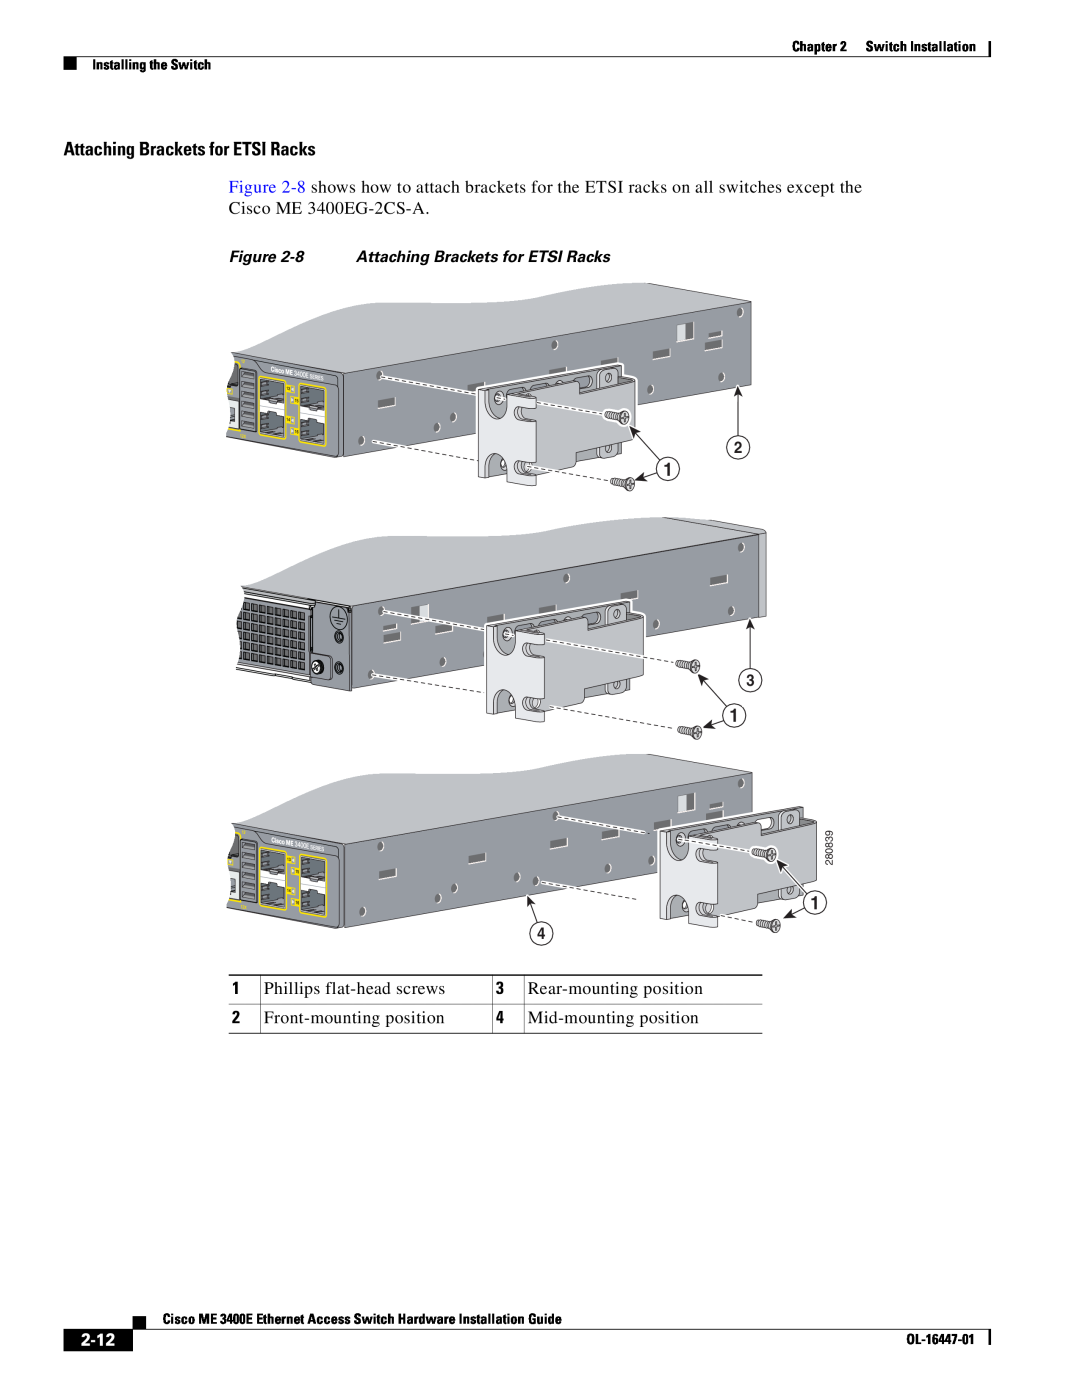 Cisco Systems OL-16447-01 2-12, 8 Attaching Brackets for ETSI Racks, Switch Installation Installing the Switch, 280839 